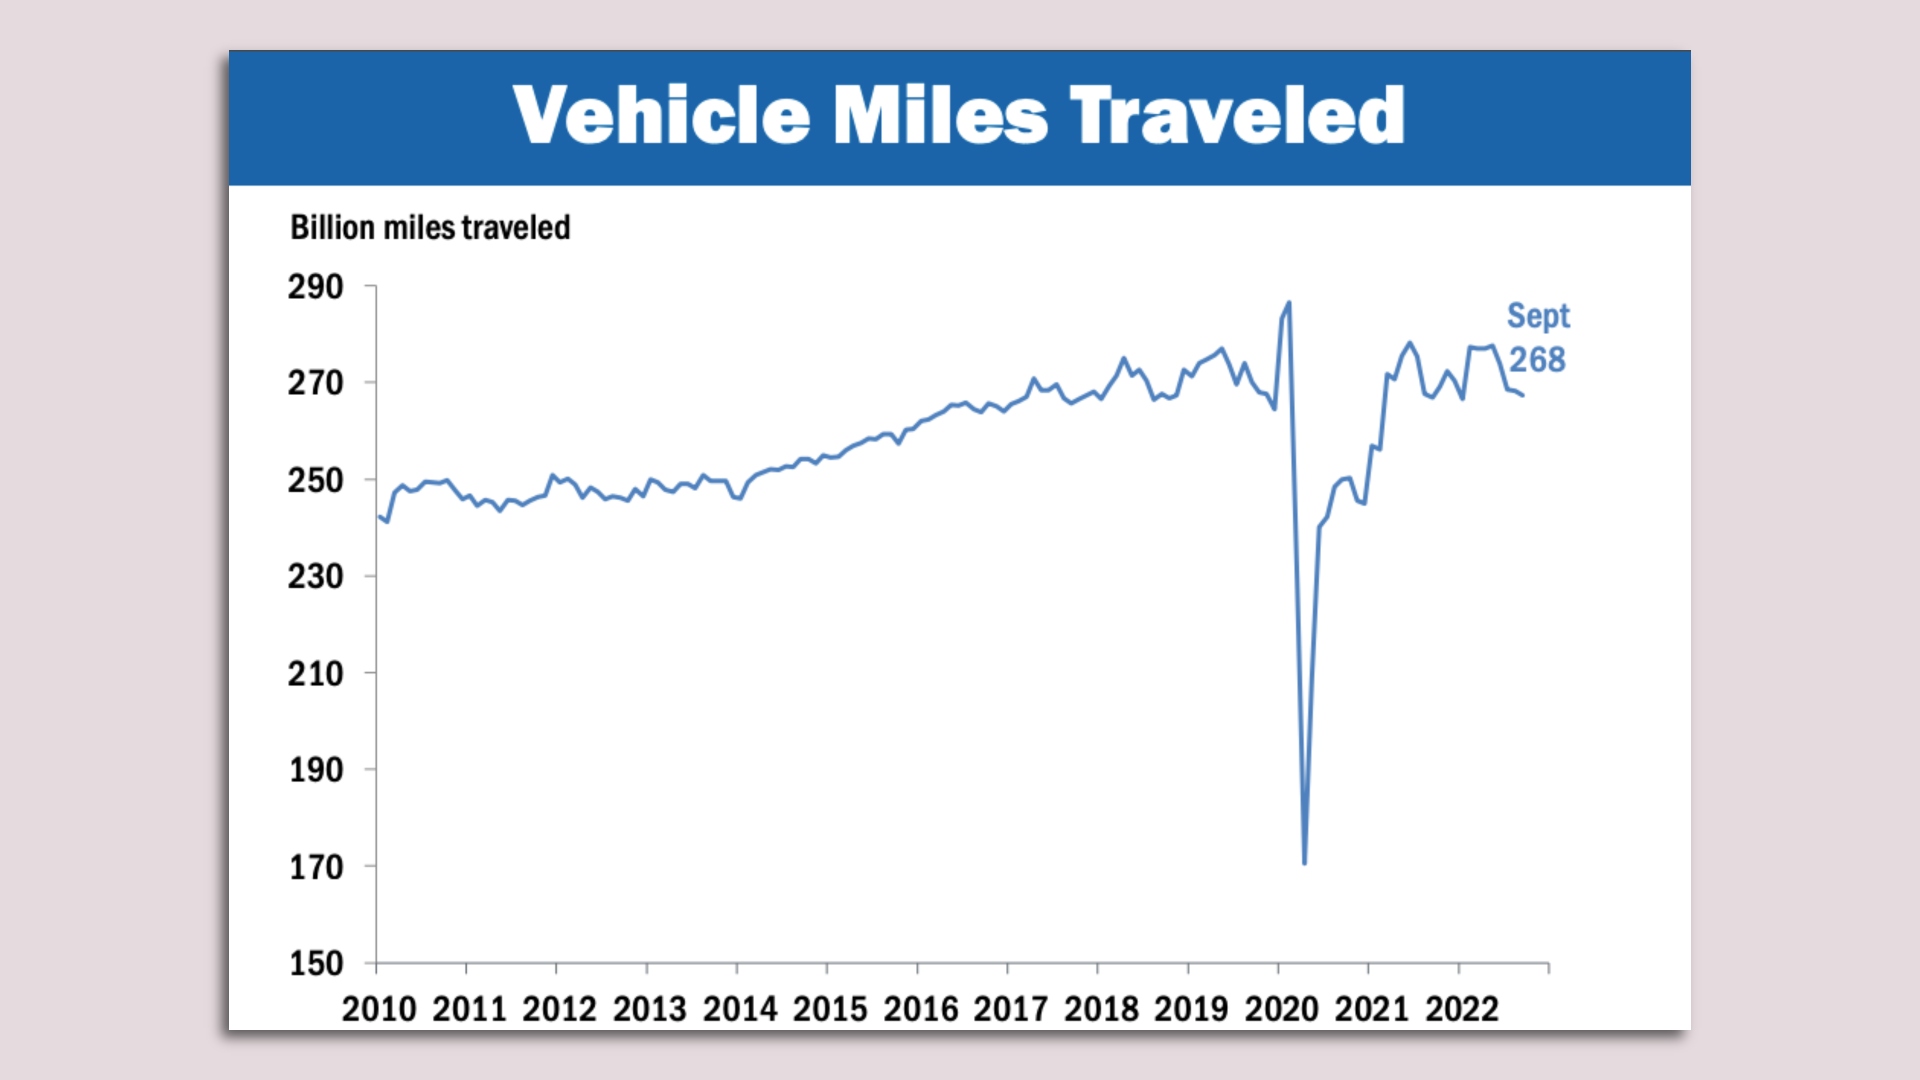 Chart showing the pandemic dip in vehicle miles traveled